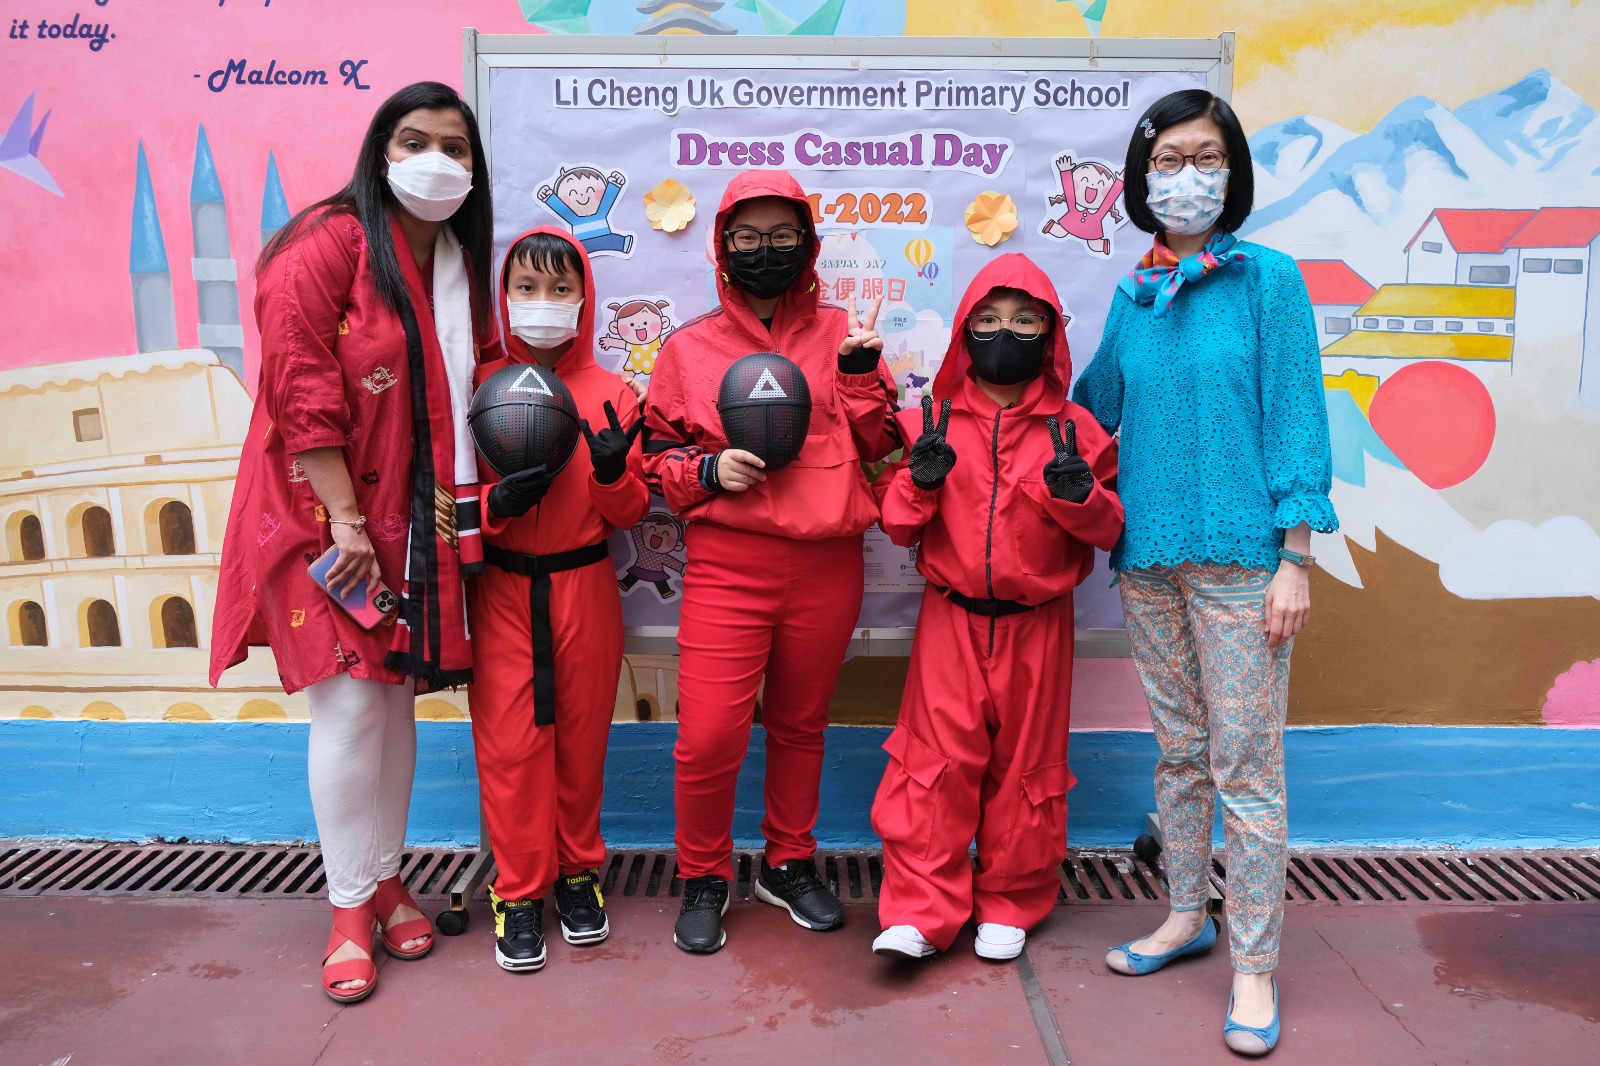 2021-10-31 Dress Casual Day – Li Cheng Uk Government Primary School